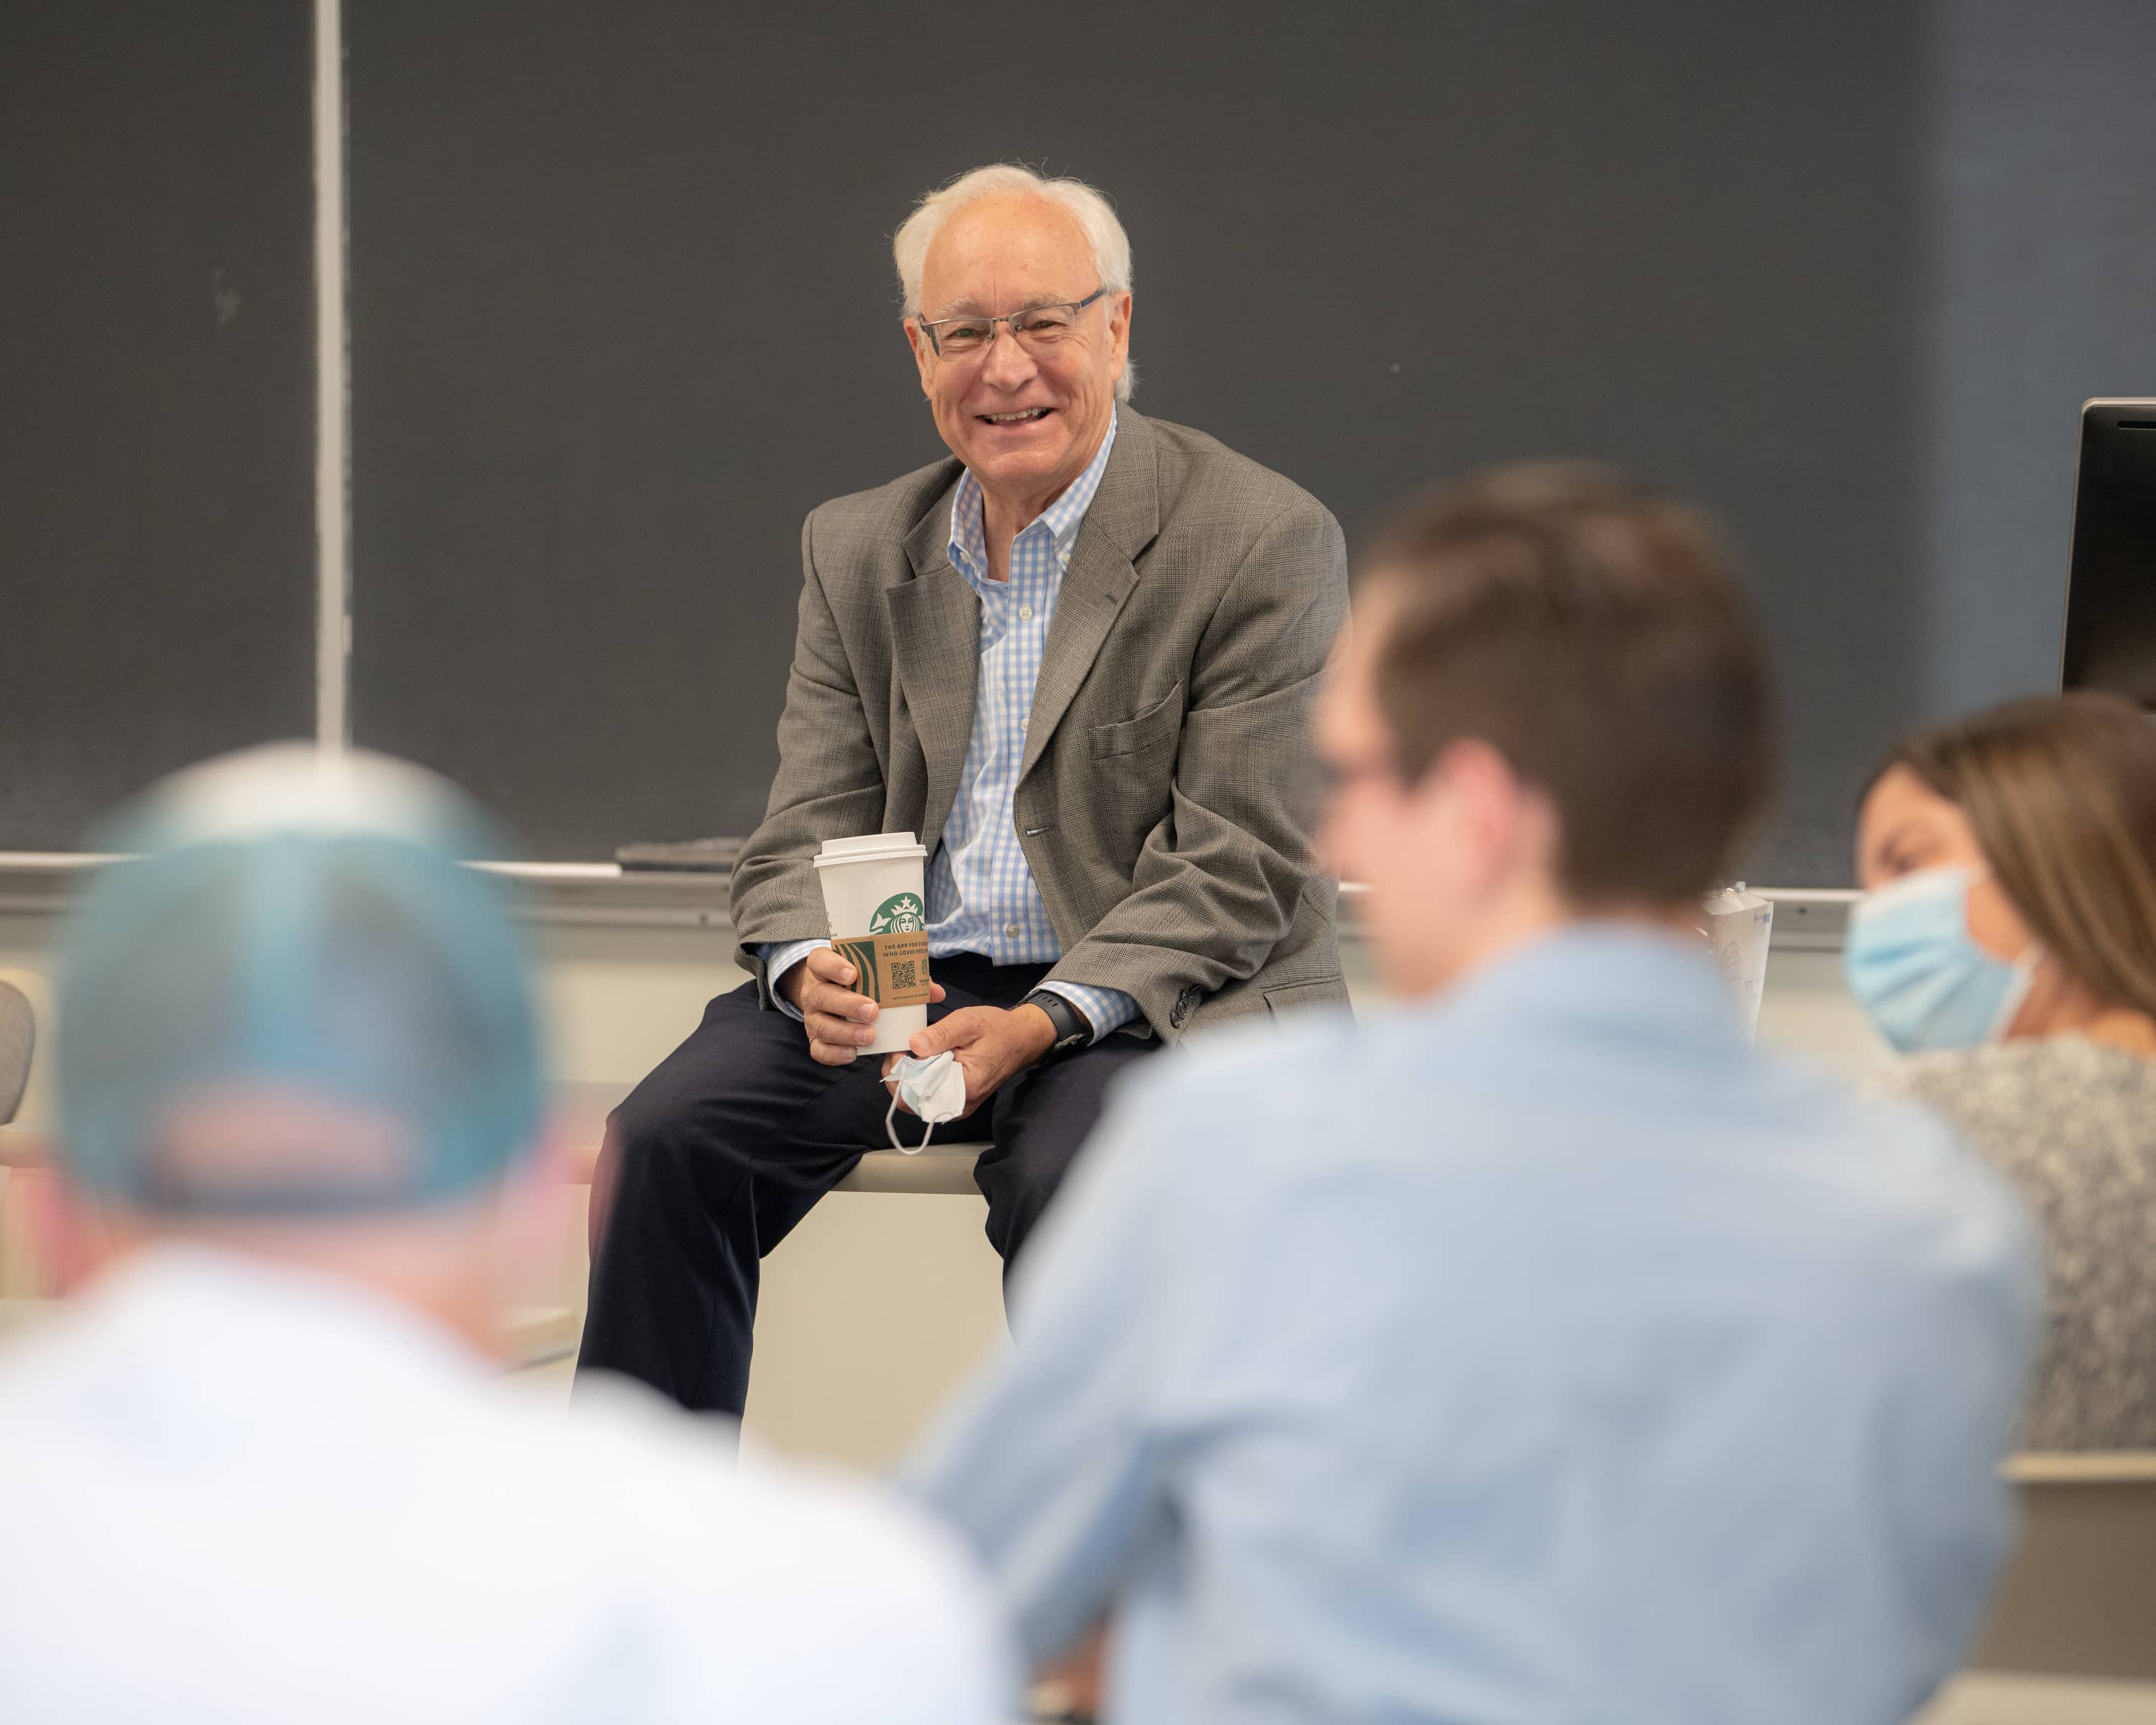 Pres. Sherman interacted with faculty, staff and students, along with members community, in informal - and often lively – conversation, as pictured here at OHIO Lancaster.